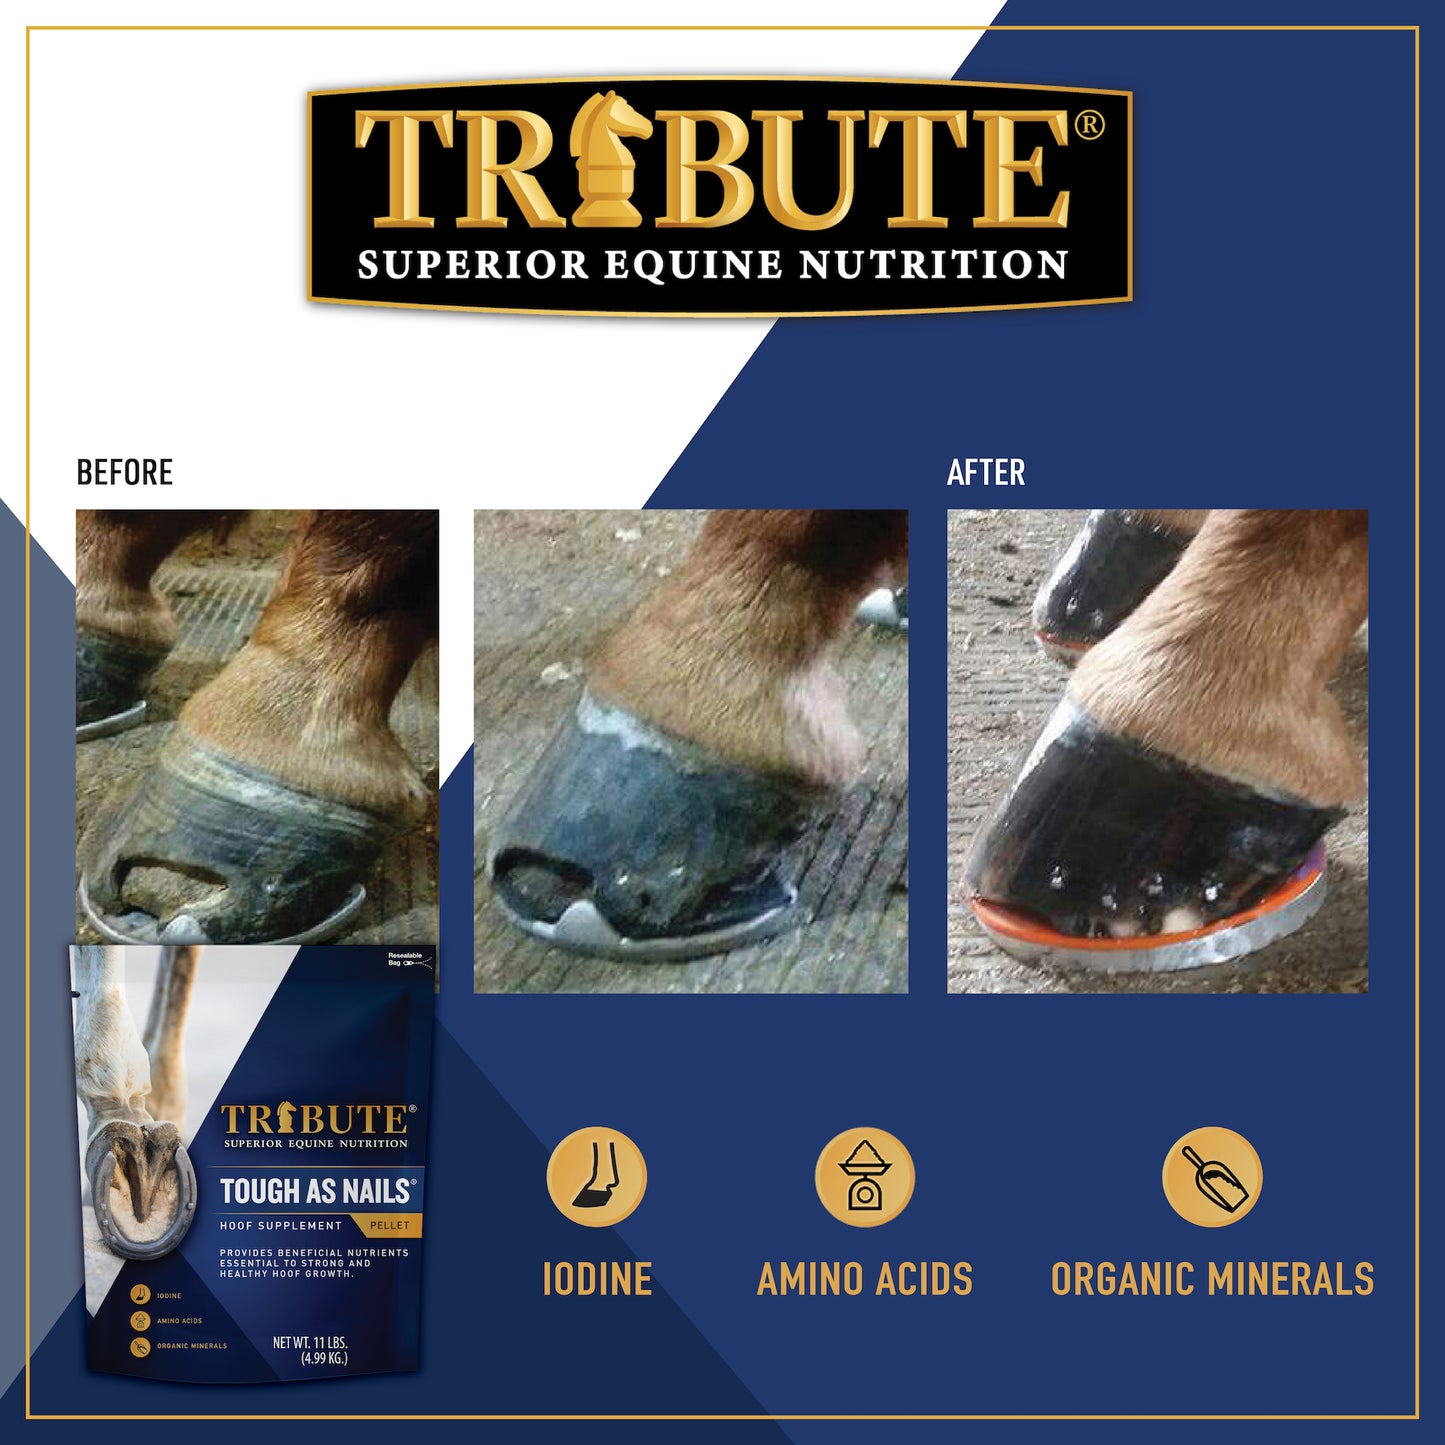 Tough As Nails®, Hoof Supplement for Horses